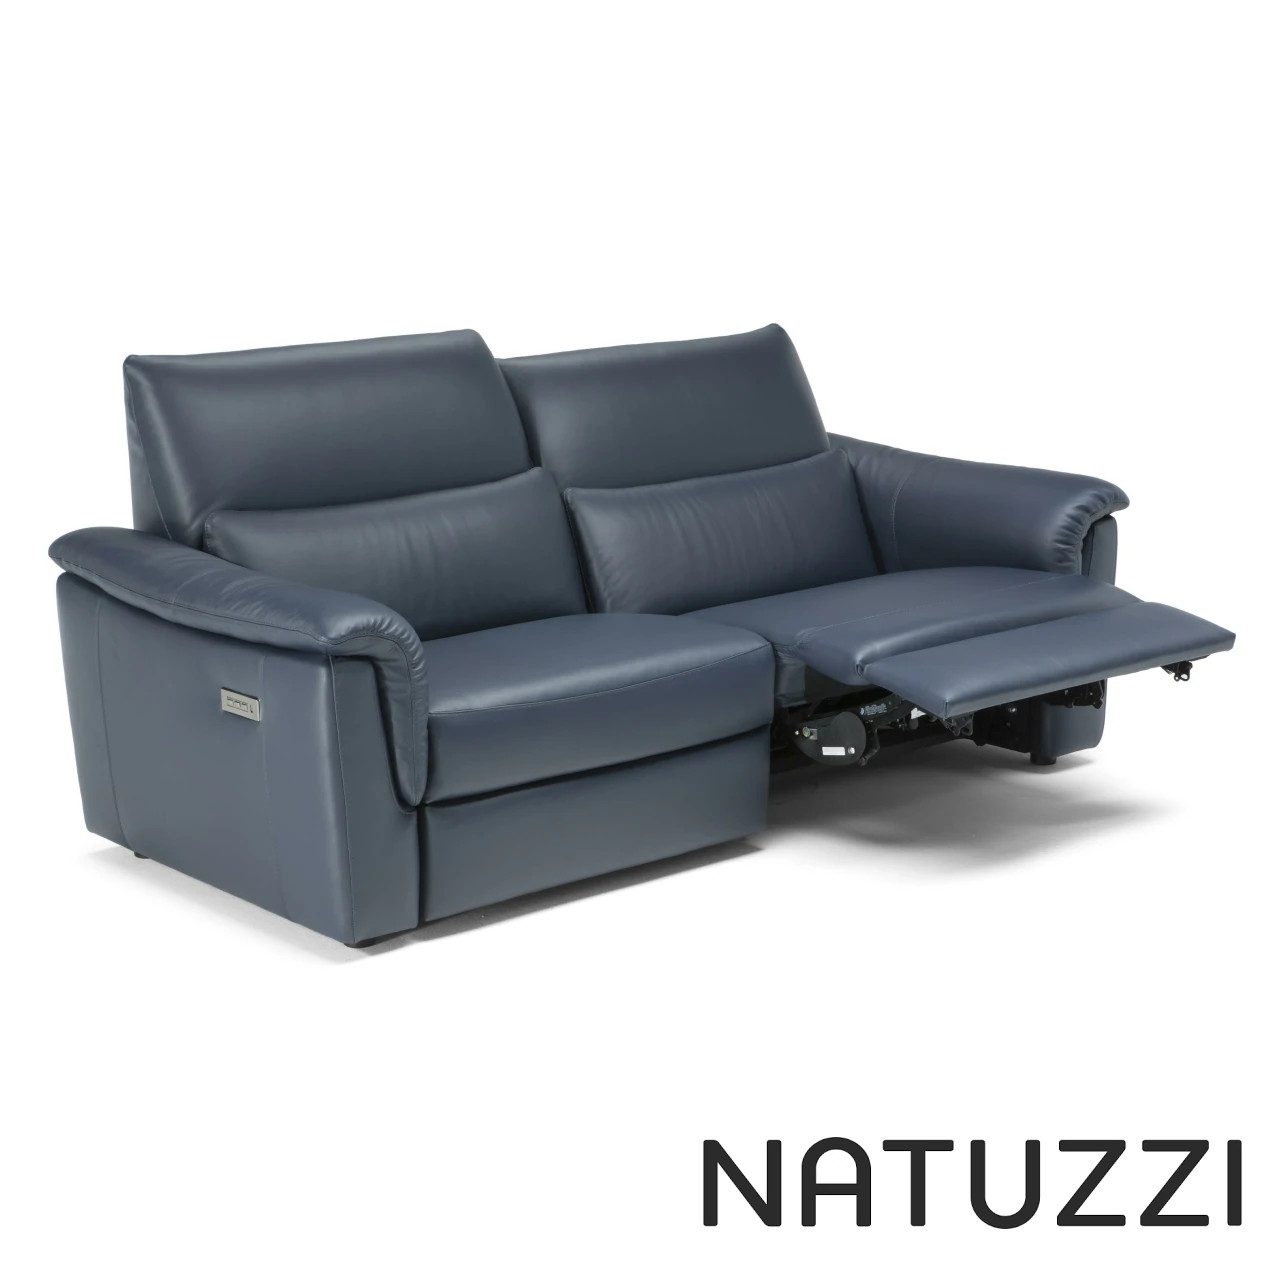 Natuzzi Editions C176 Amorevole 5 pc Sectional with 3 Recliner